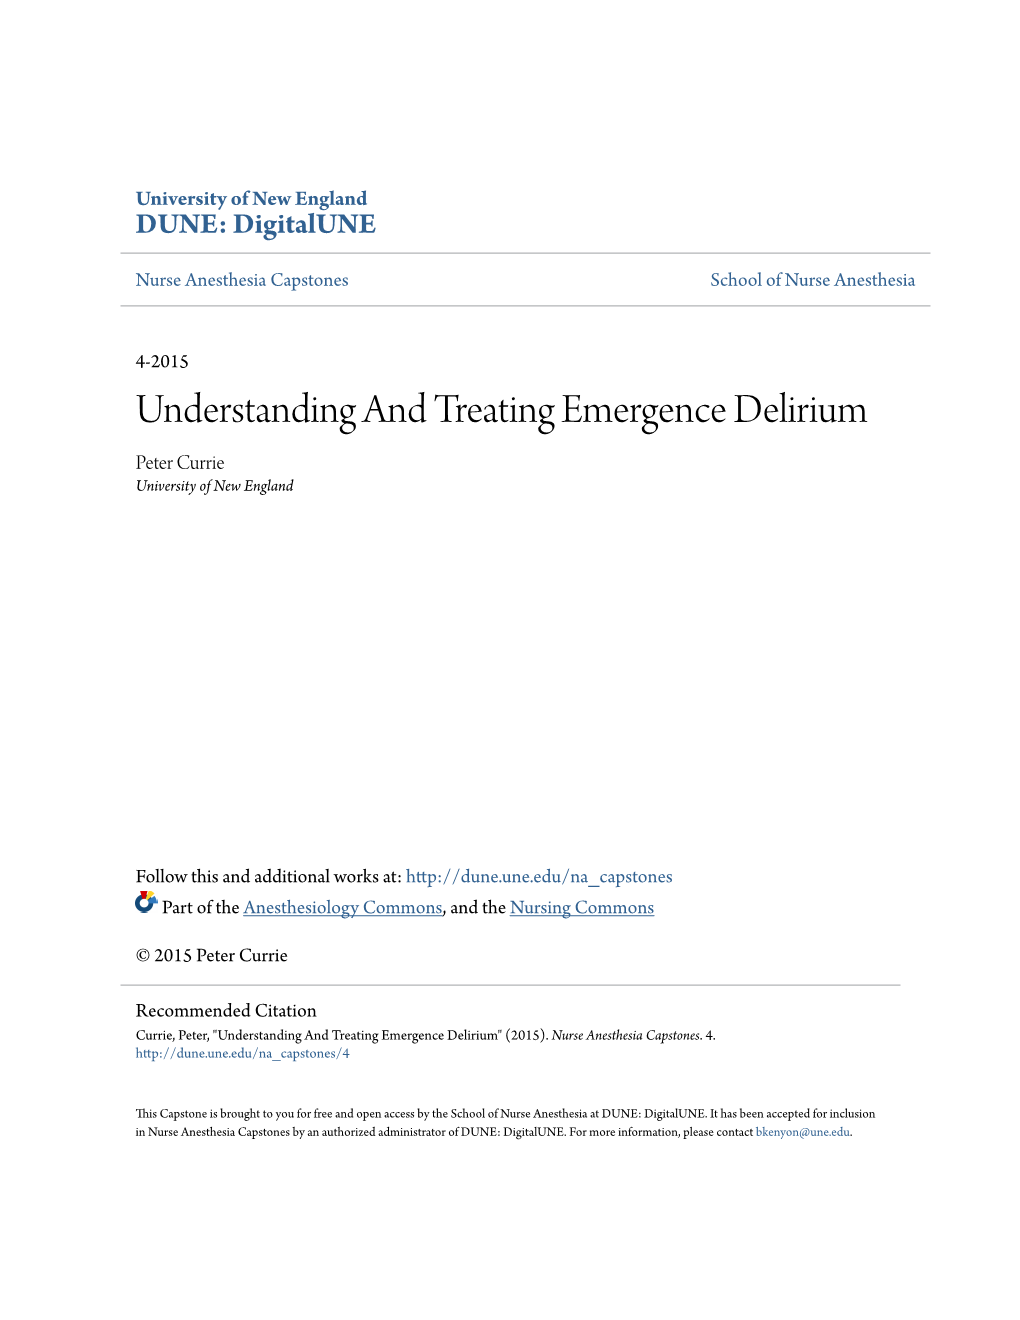 Understanding and Treating Emergence Delirium Peter Currie University of New England